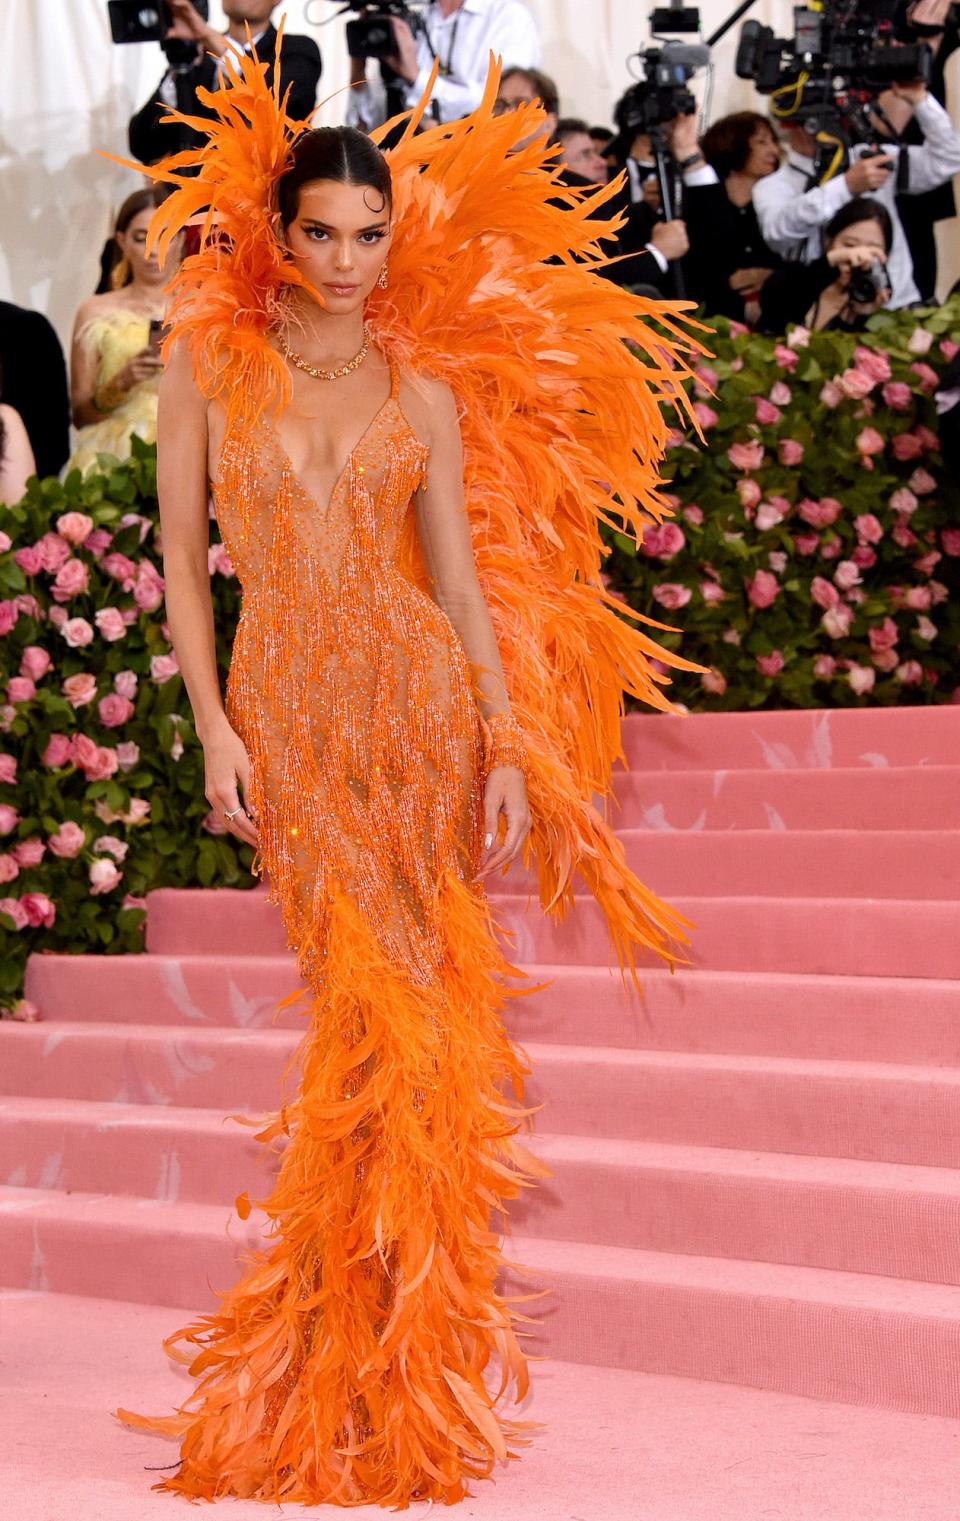 Kendall Jenner poses on the Met Gala stairs in an orange feathered dress with a giant feathered collar.